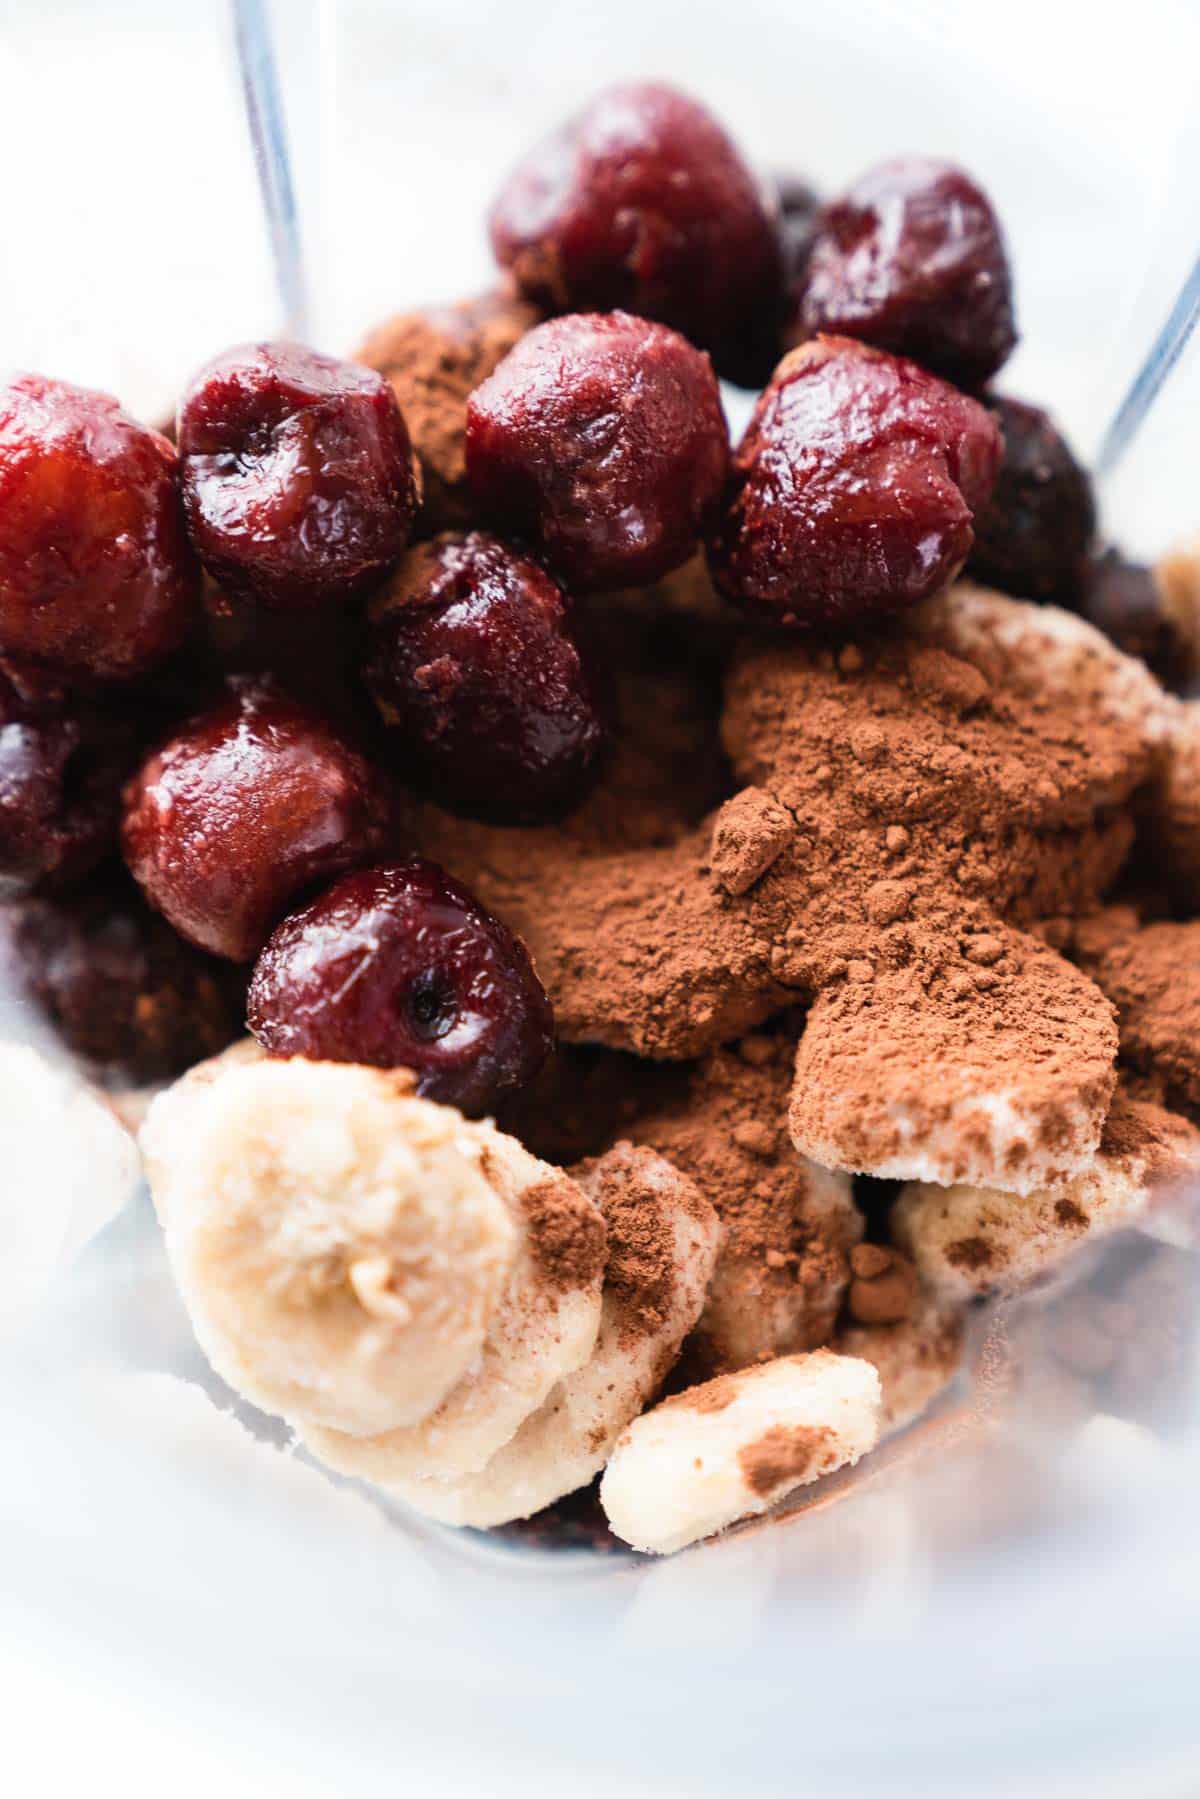 Frozen cherries, bananas and cocoa powder in a clear blender cup.